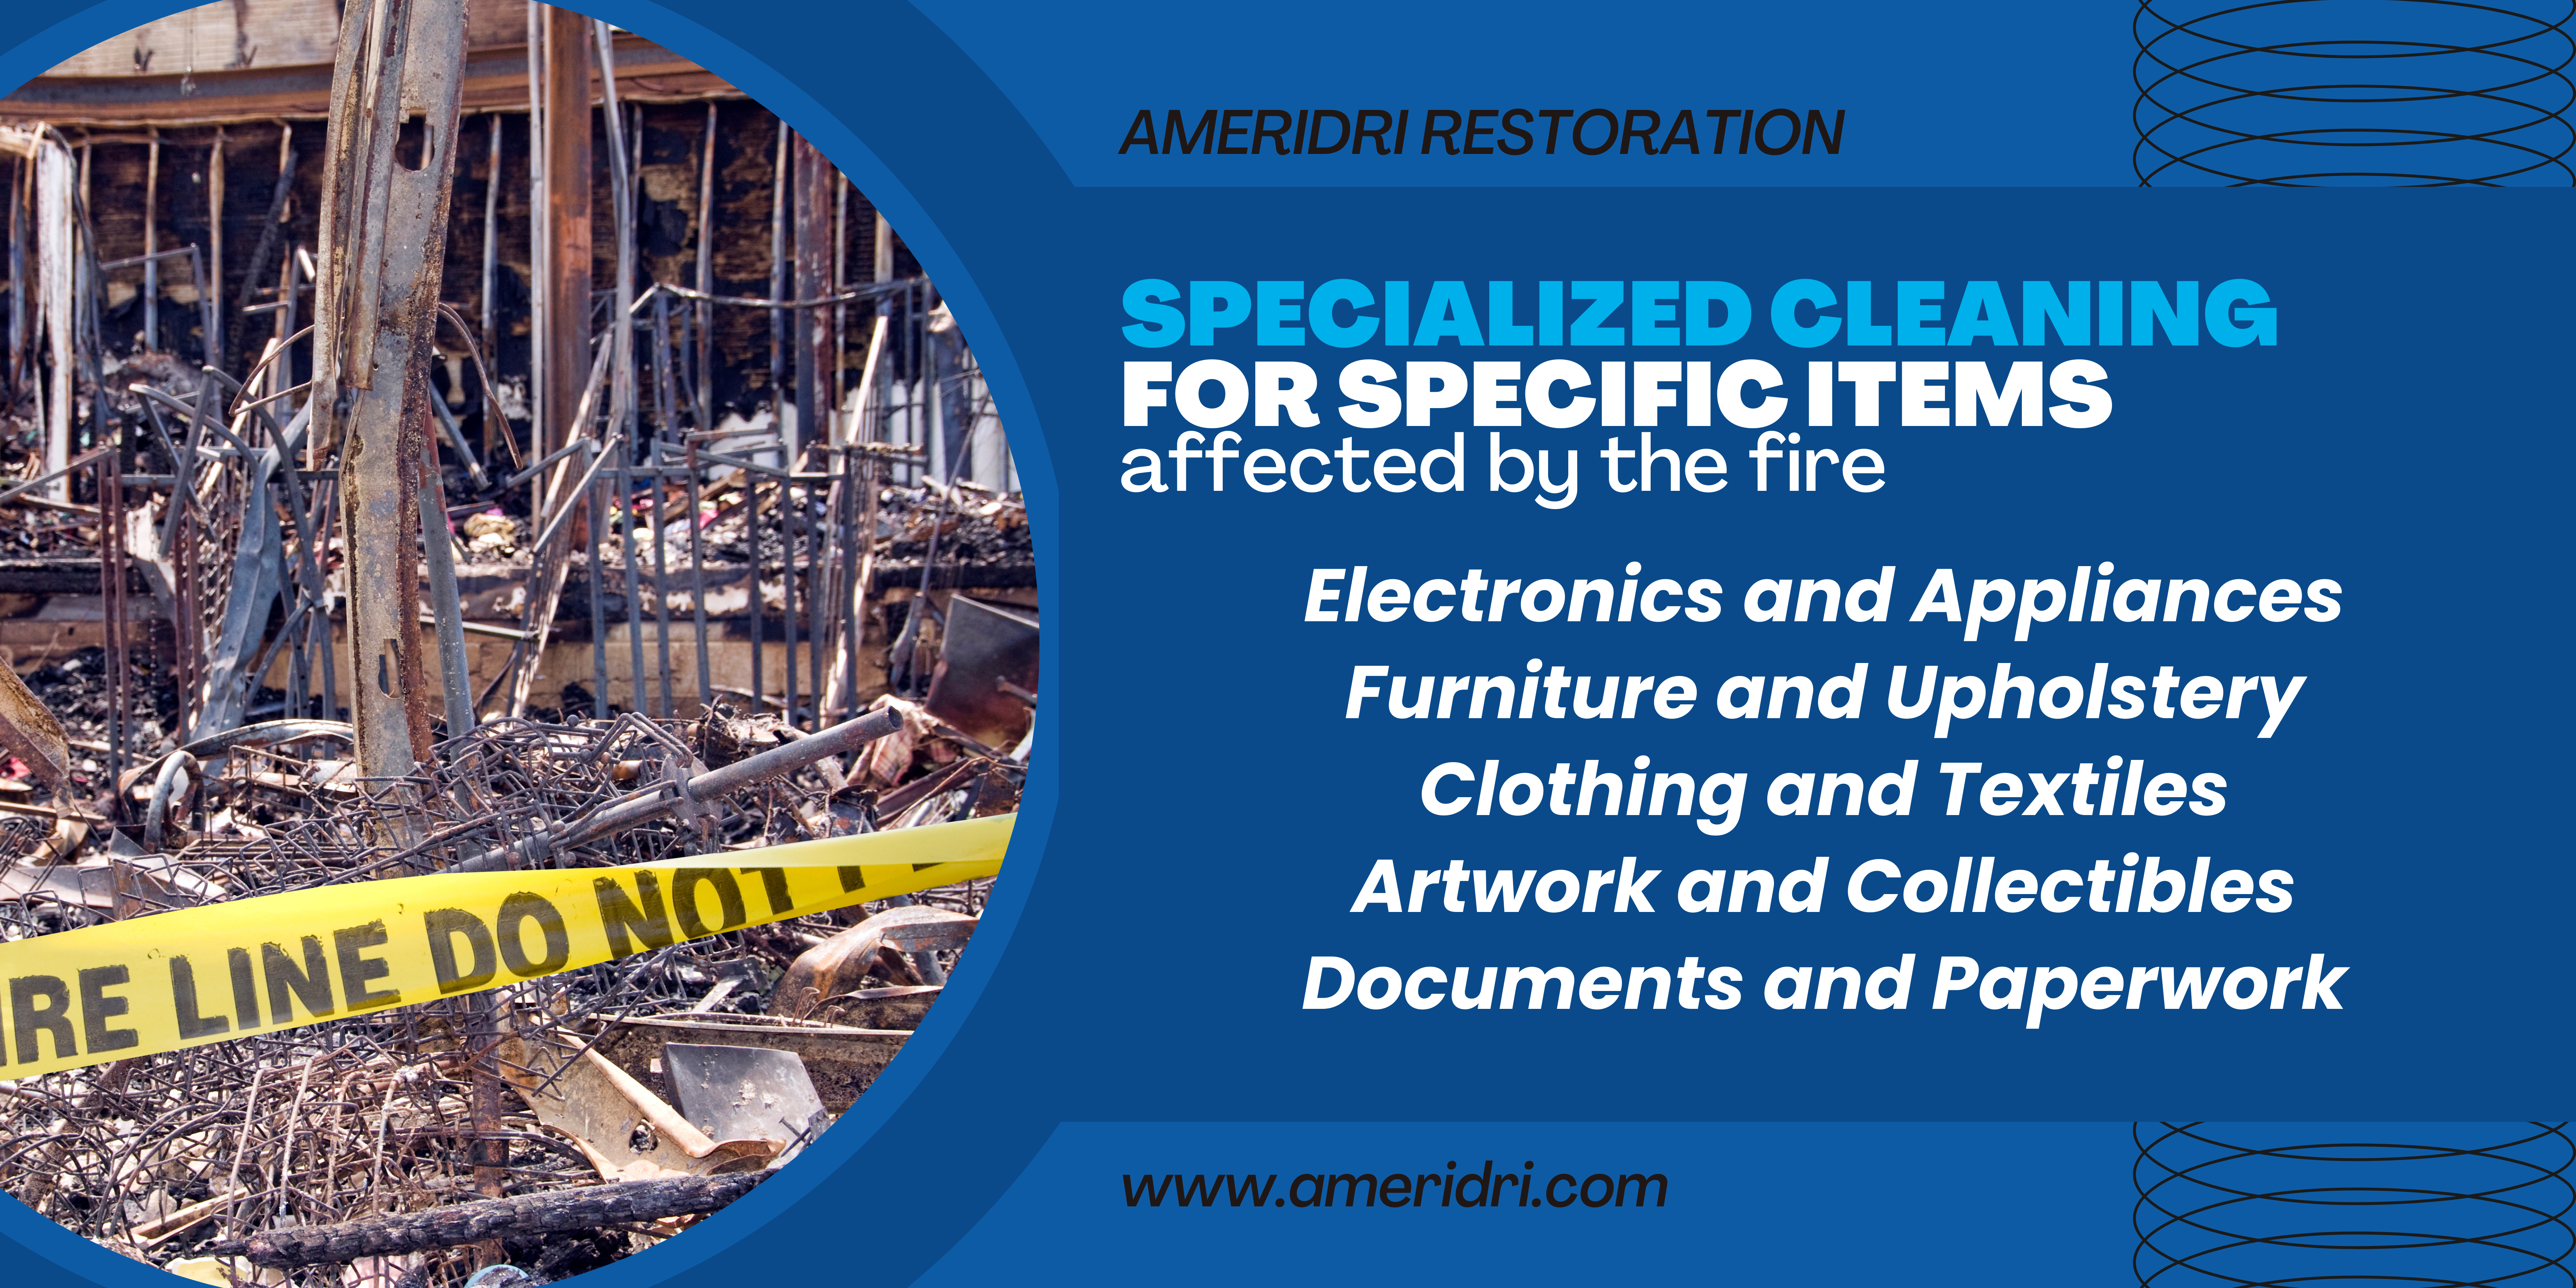 Process of Fire Damage Contents Cleaning and Restoration